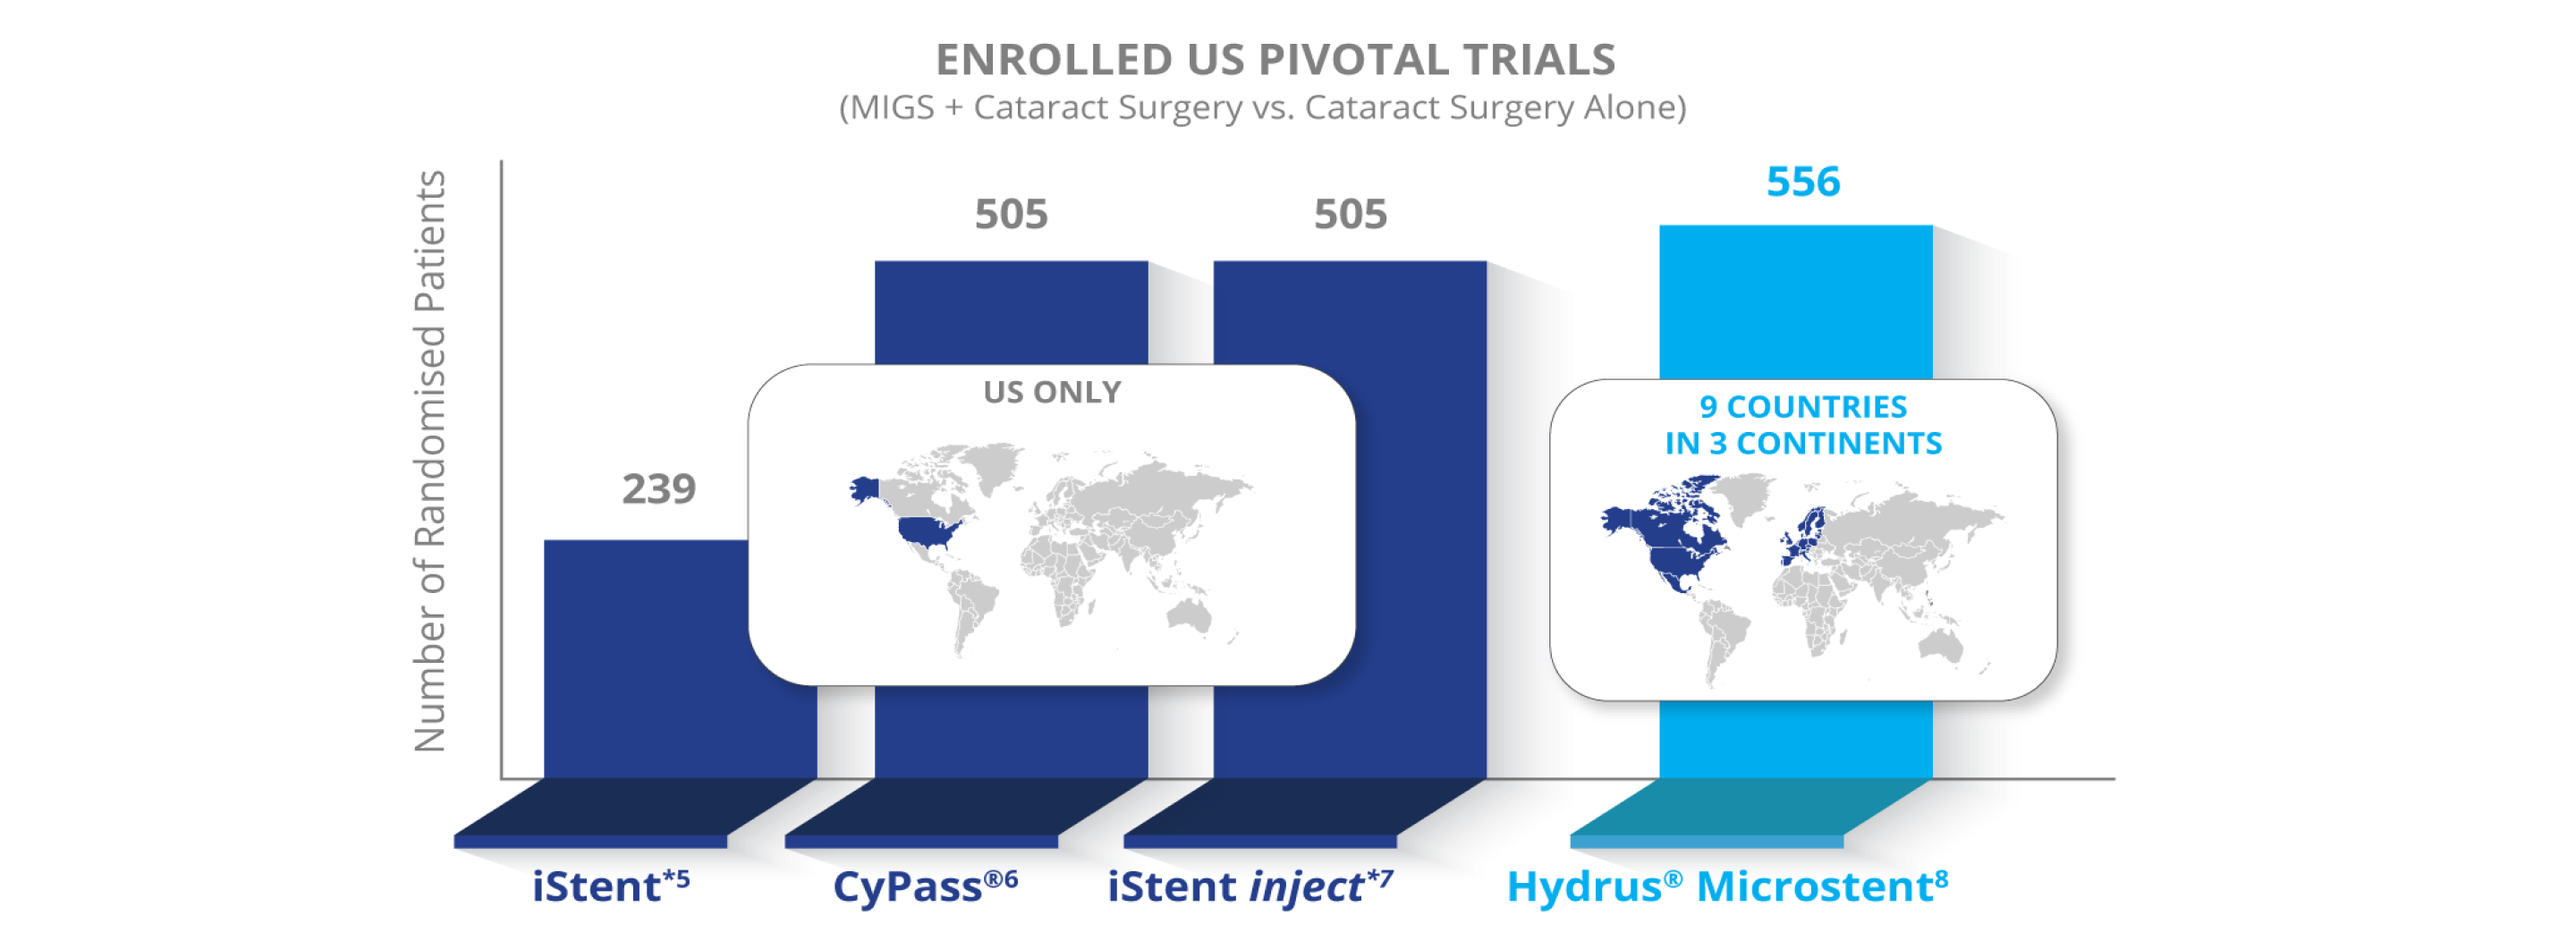 A bar graph indicating the Enrolled US Pivotal Trials for the iStent with 239 randomised patients, CyPass with 505 randomised patients, iStent inject with 505 randomised patients and the Hydrus Microstent with 556 randomised patients.